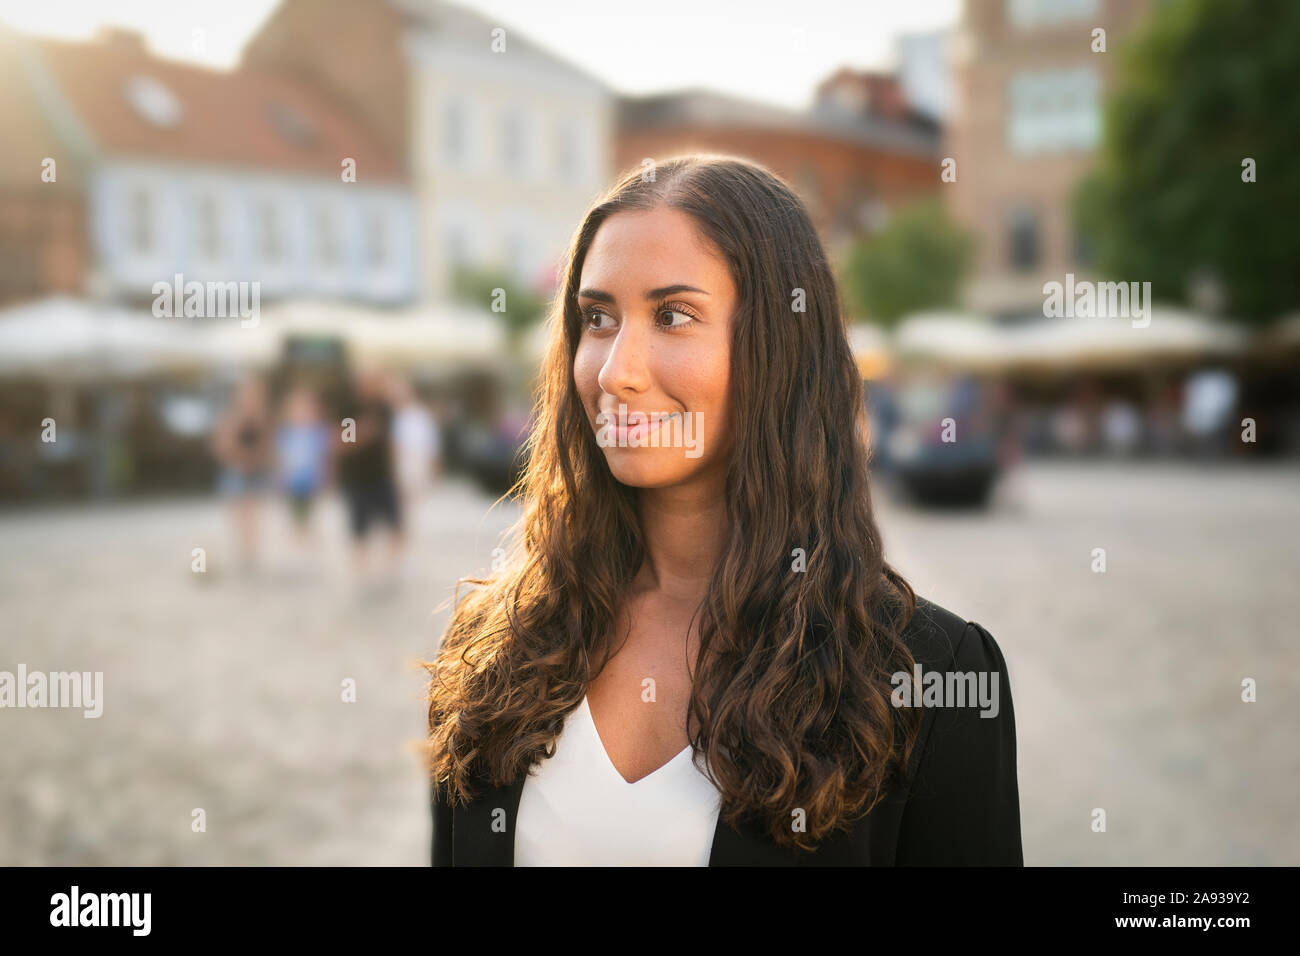 Smiling woman looking away Stock Photo